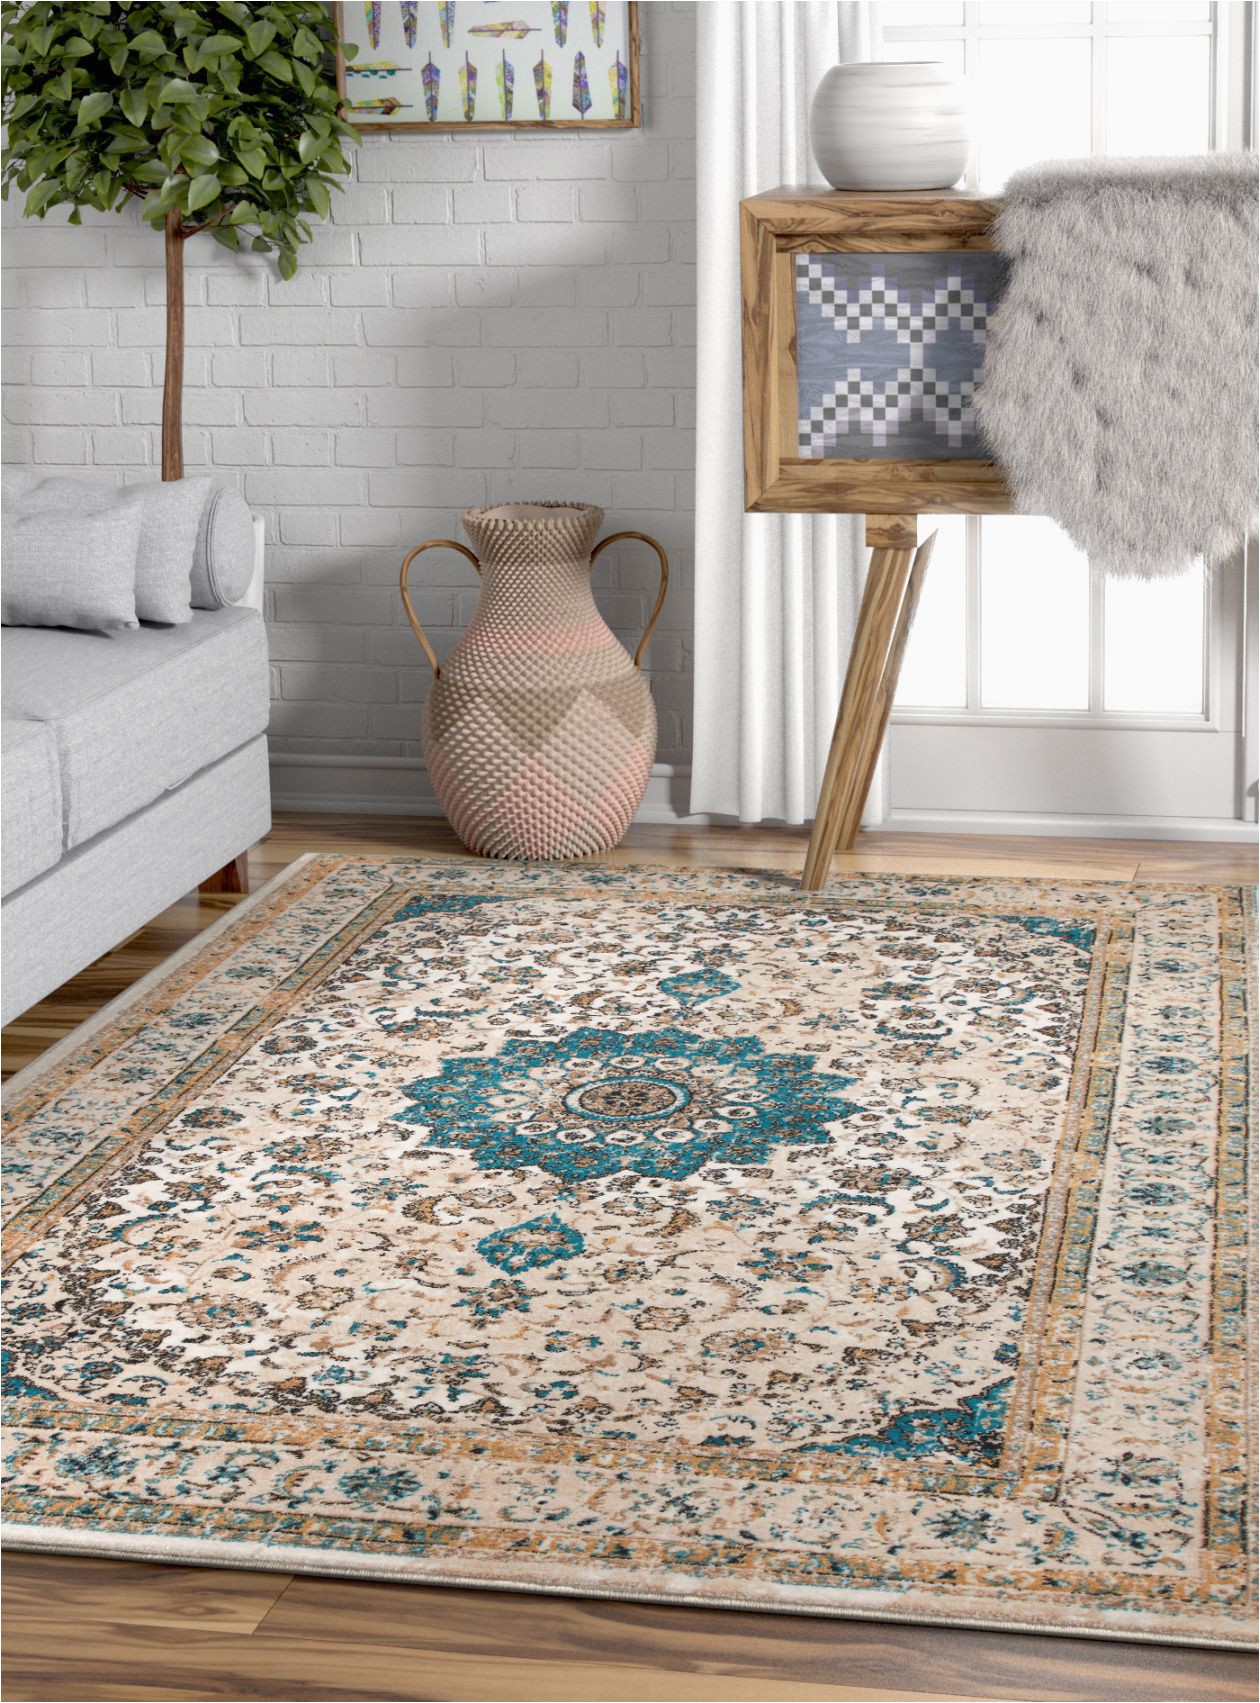 Shabby Chic Style area Rugs Well Woven Djemila Medallion Beige Blue Vintage Persian Floral oriental area Rug Distressed Modern Shabby Chic Thick soft Plush Walmart